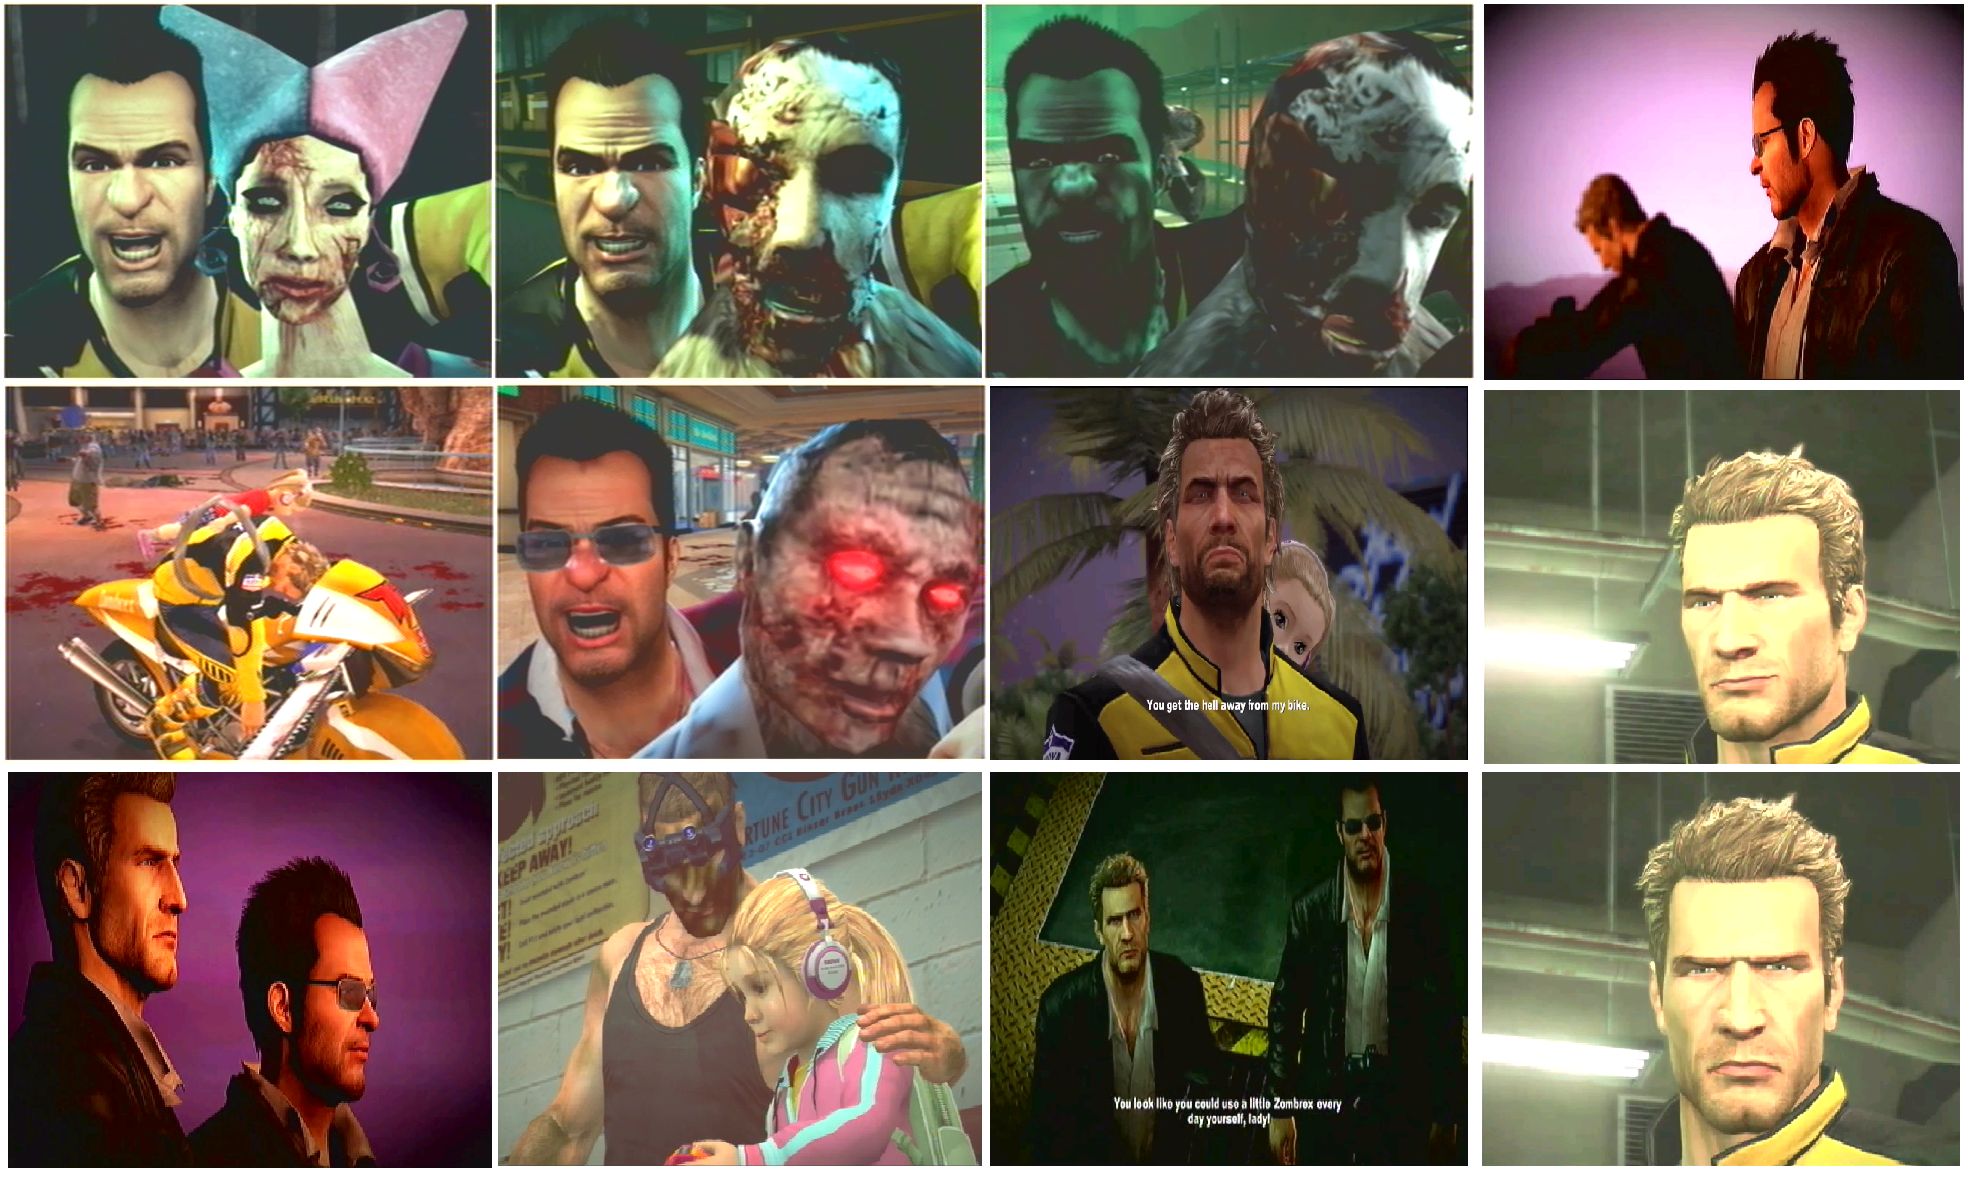 video game, dead rising